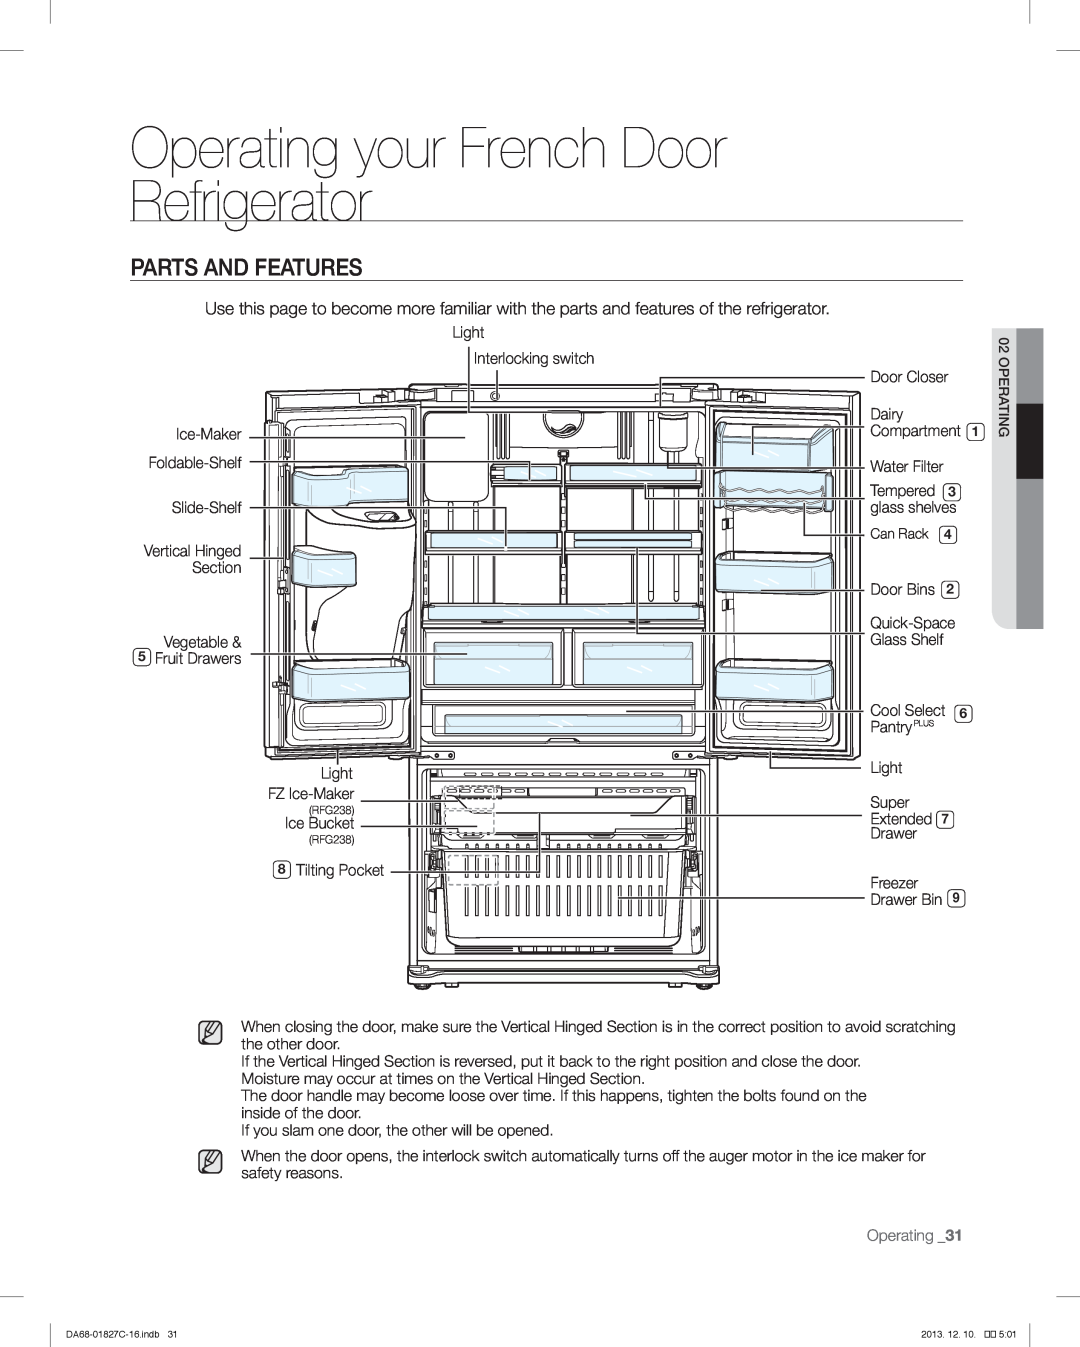 Samsung RFG237AARS user manual Parts And Features, Operating your French Door Refrigerator 